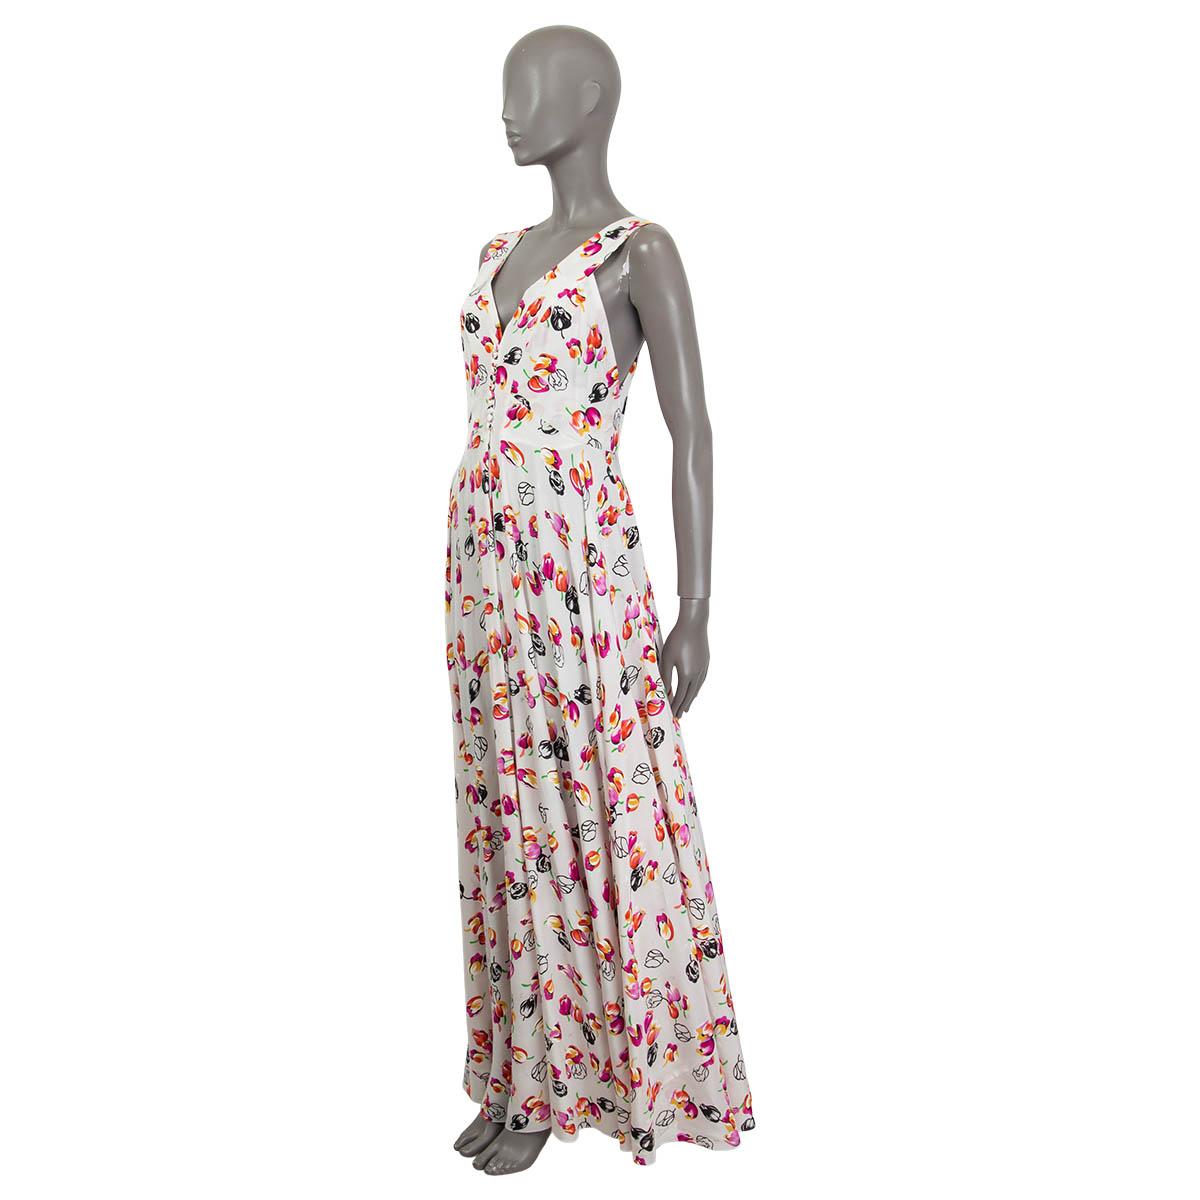 100% authentic Louis Vuitton 2019 sleeveless maxi dress in off-white, purple, green, black and pink silk (100%). Features a v-neck with faux buttons and a tulip print. Opens with a concealed zipper and a hook at the back. Unlined. Brand new, with